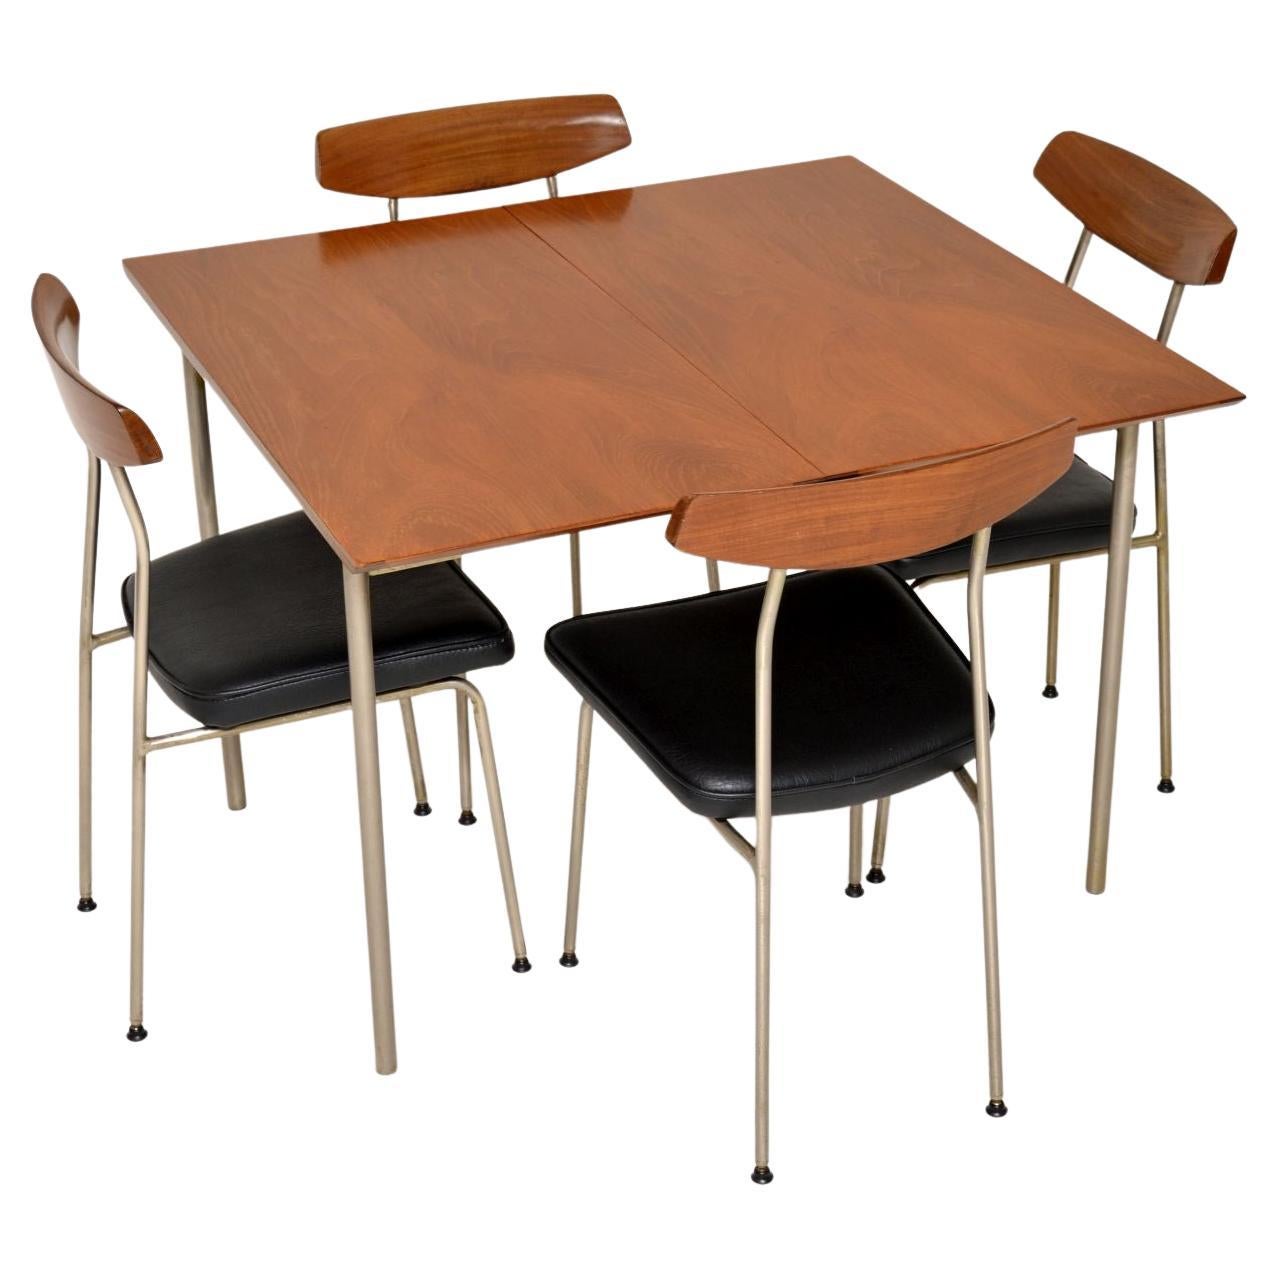 1950's Vintage Stag S Range Teak Dining Table & Chairs